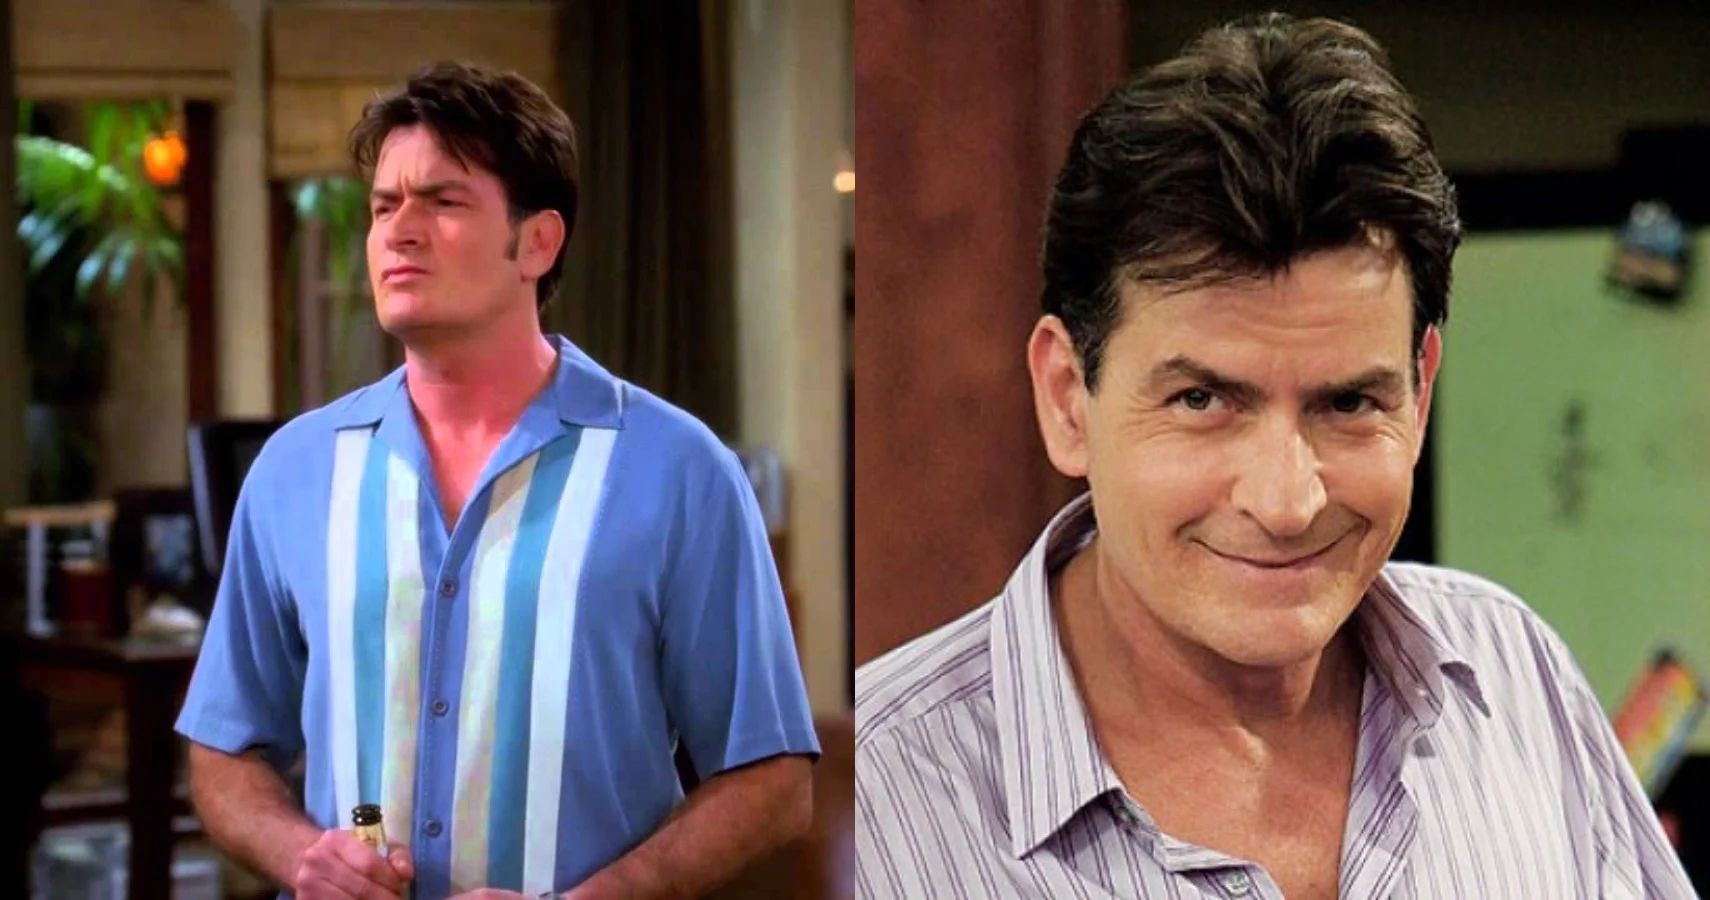 ...and Charlie Sheen was the highest paid TV actor thanks to the long-runni...